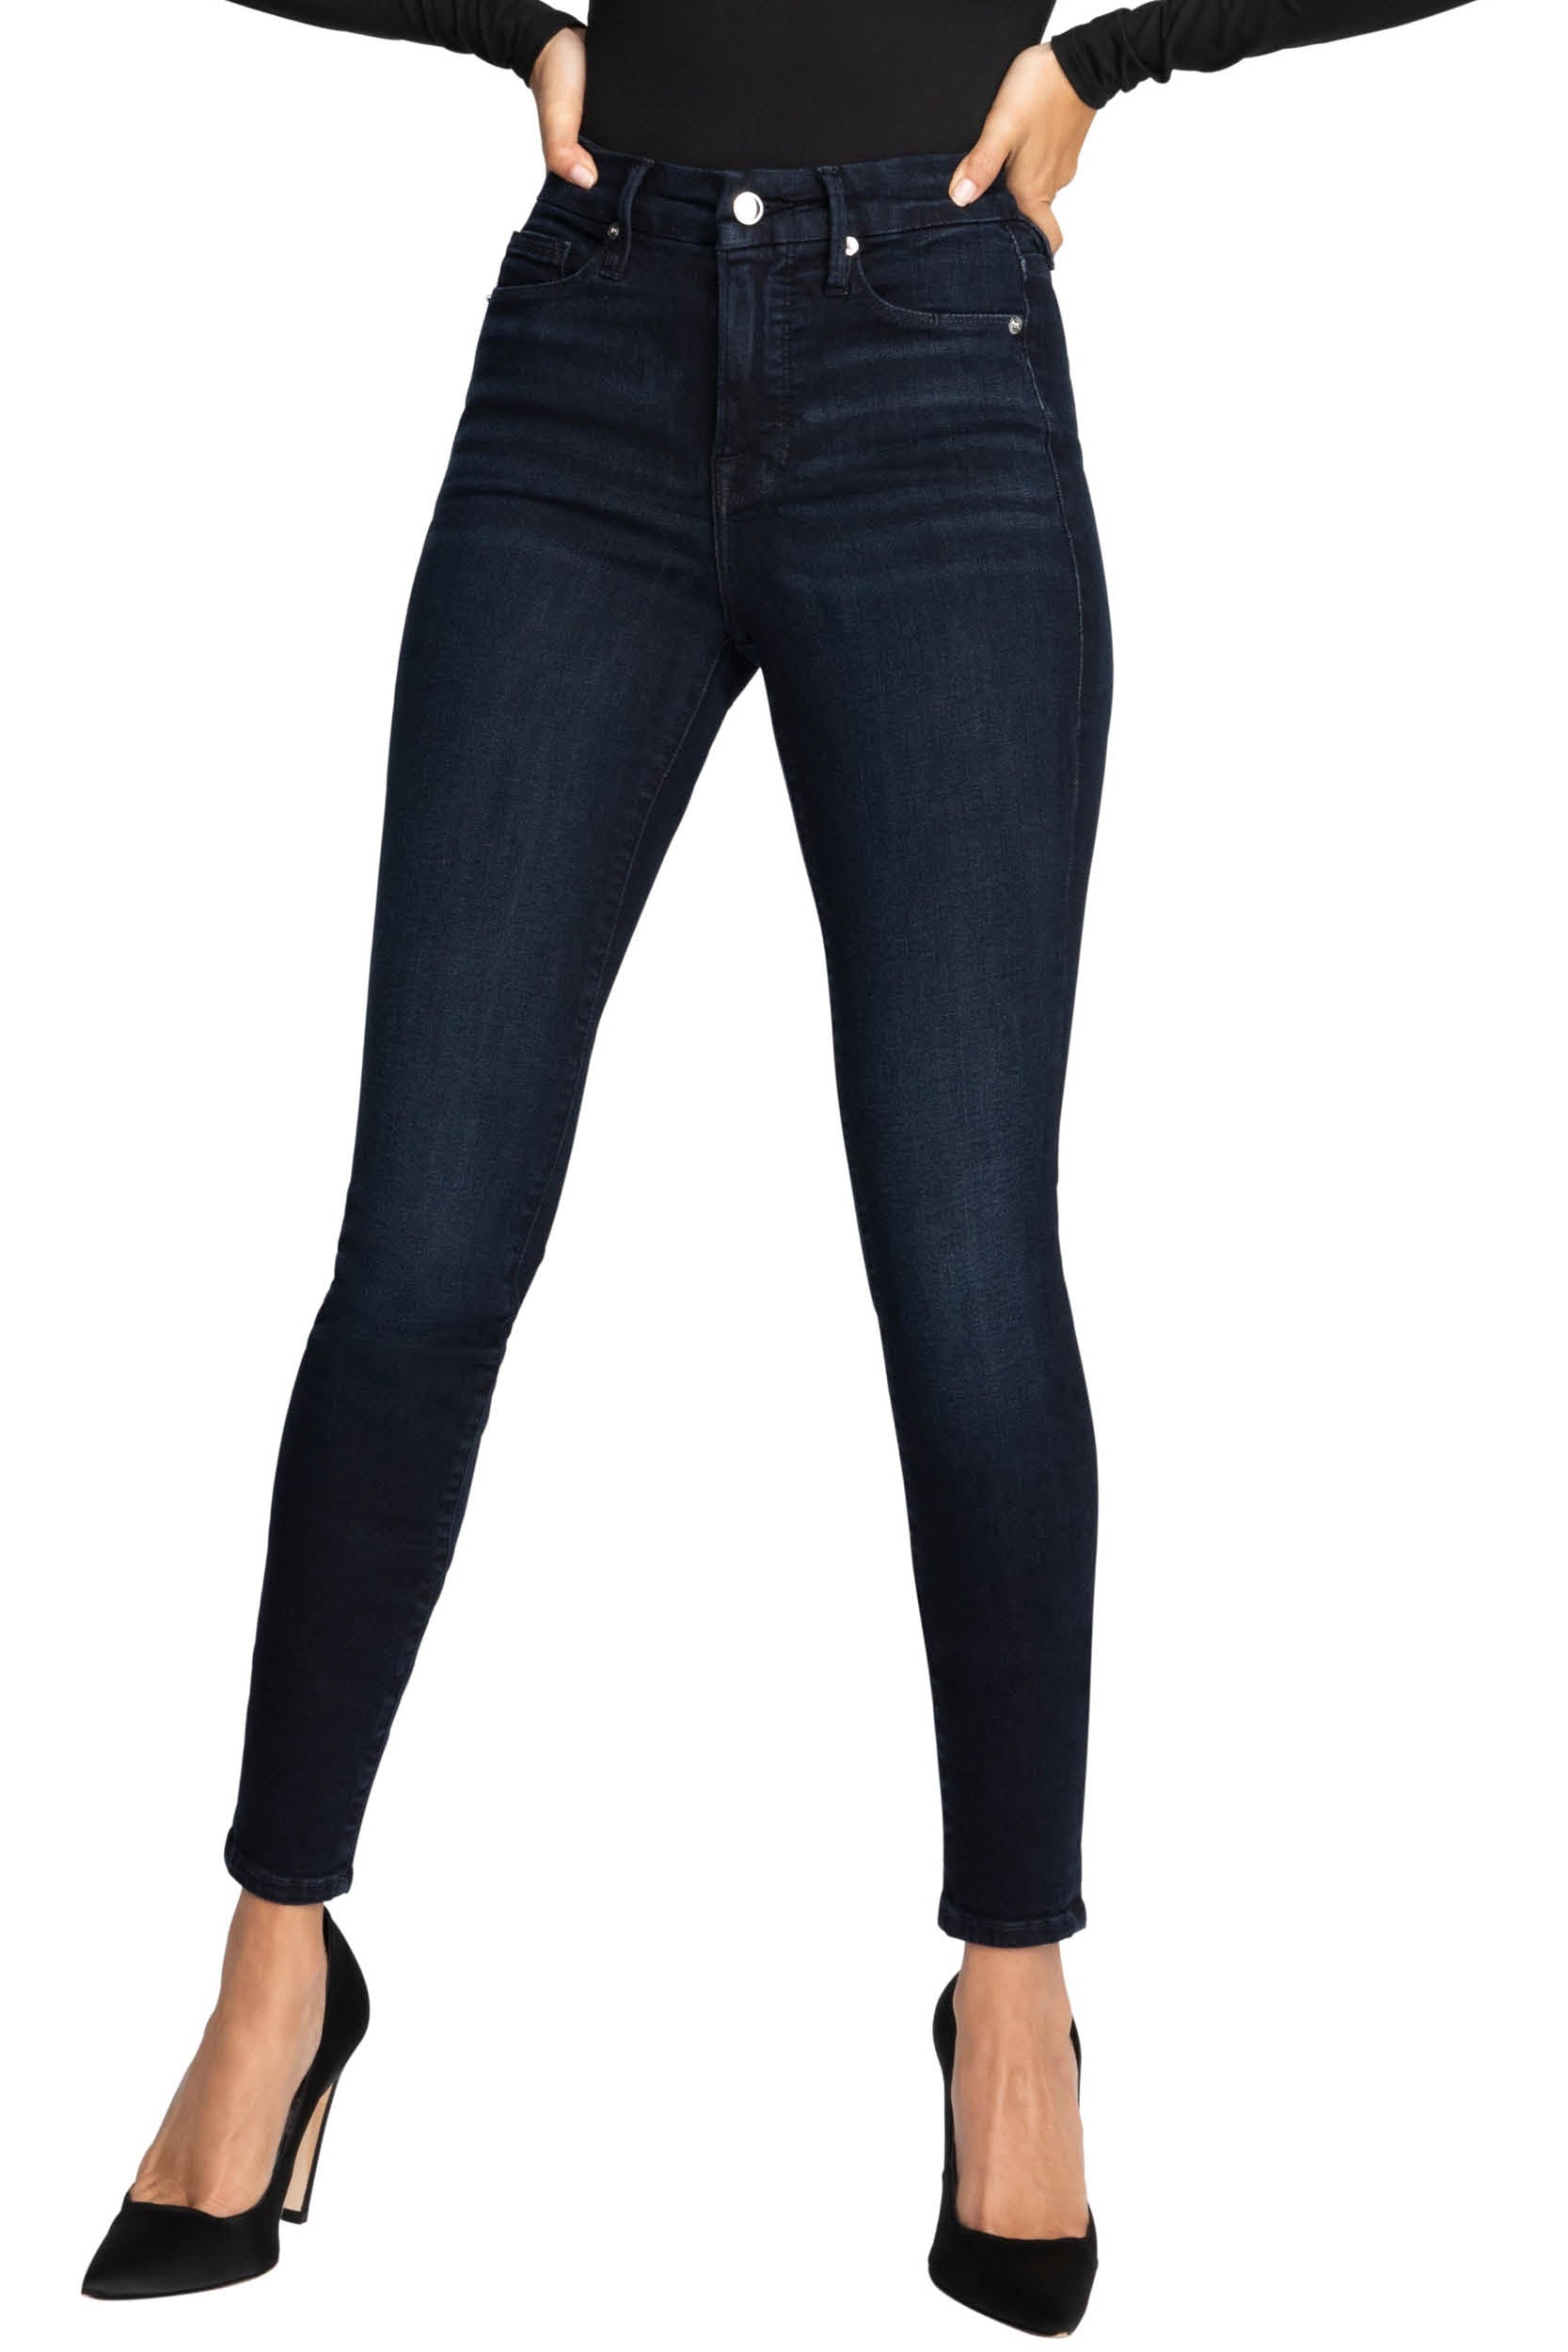 Front of women wearing the Good American Good Legs Jeans